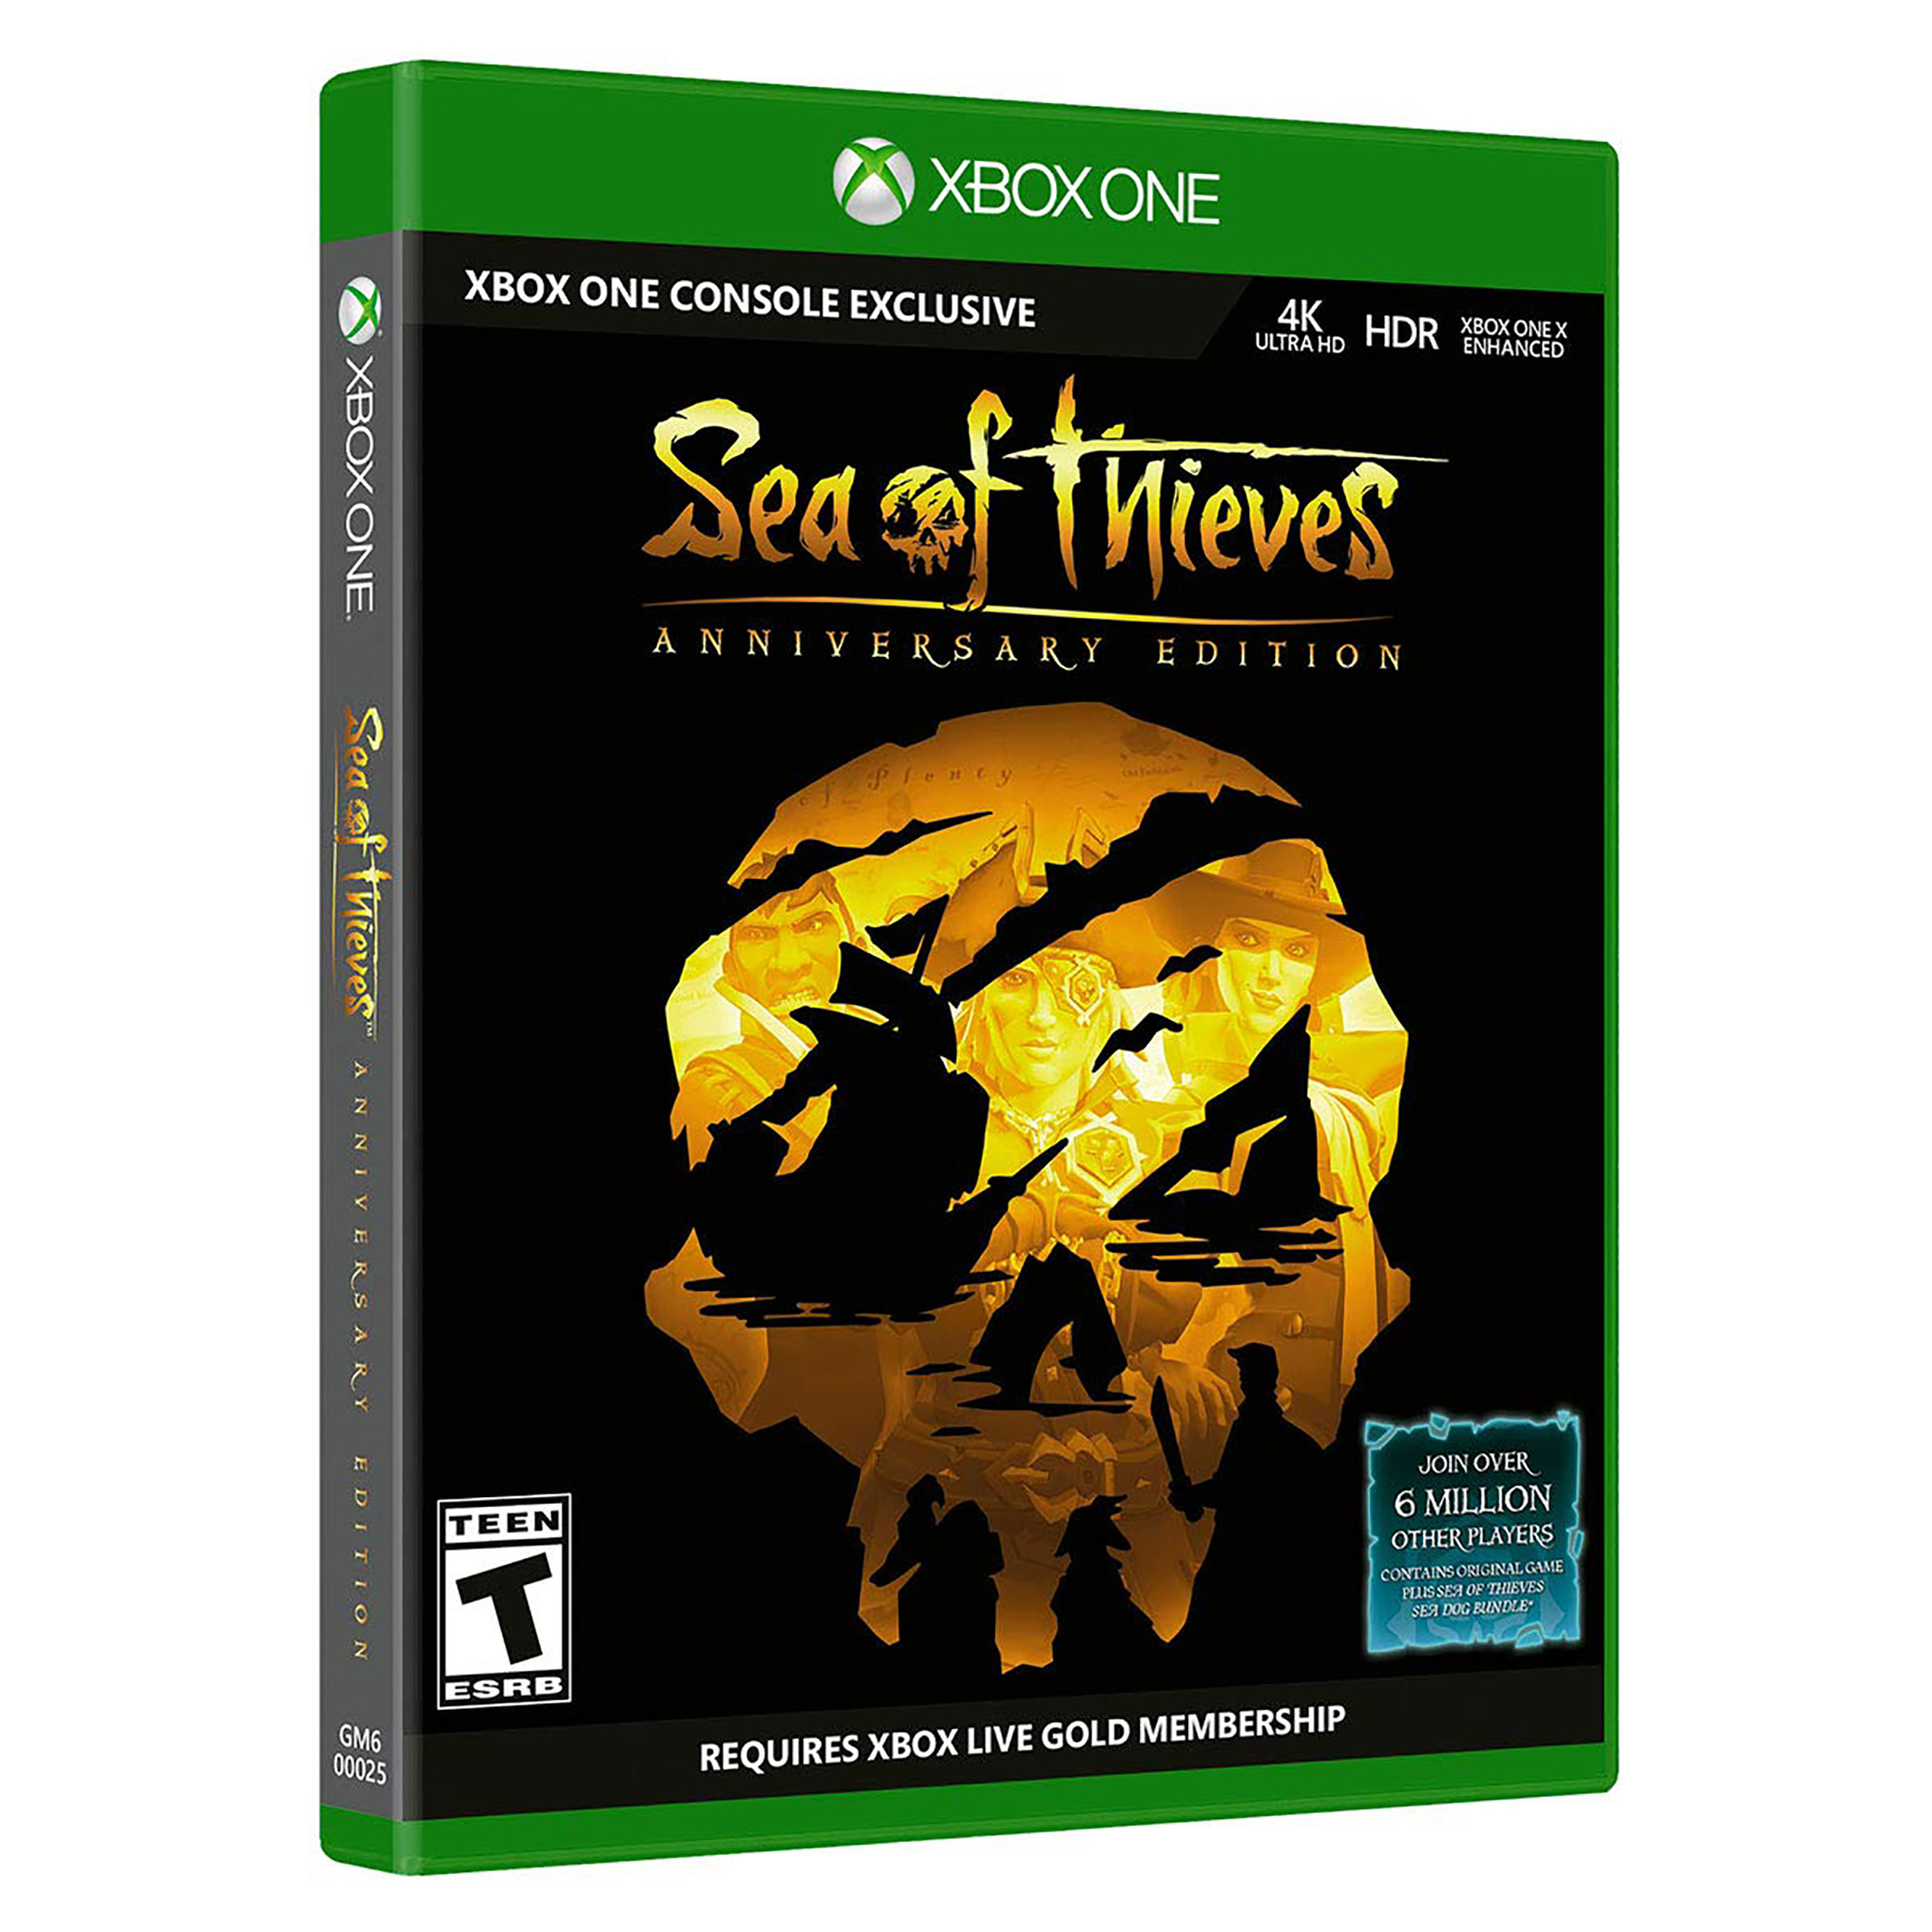 Sea of Thieves: Anniversary Edition - Xbox One - image 2 of 2